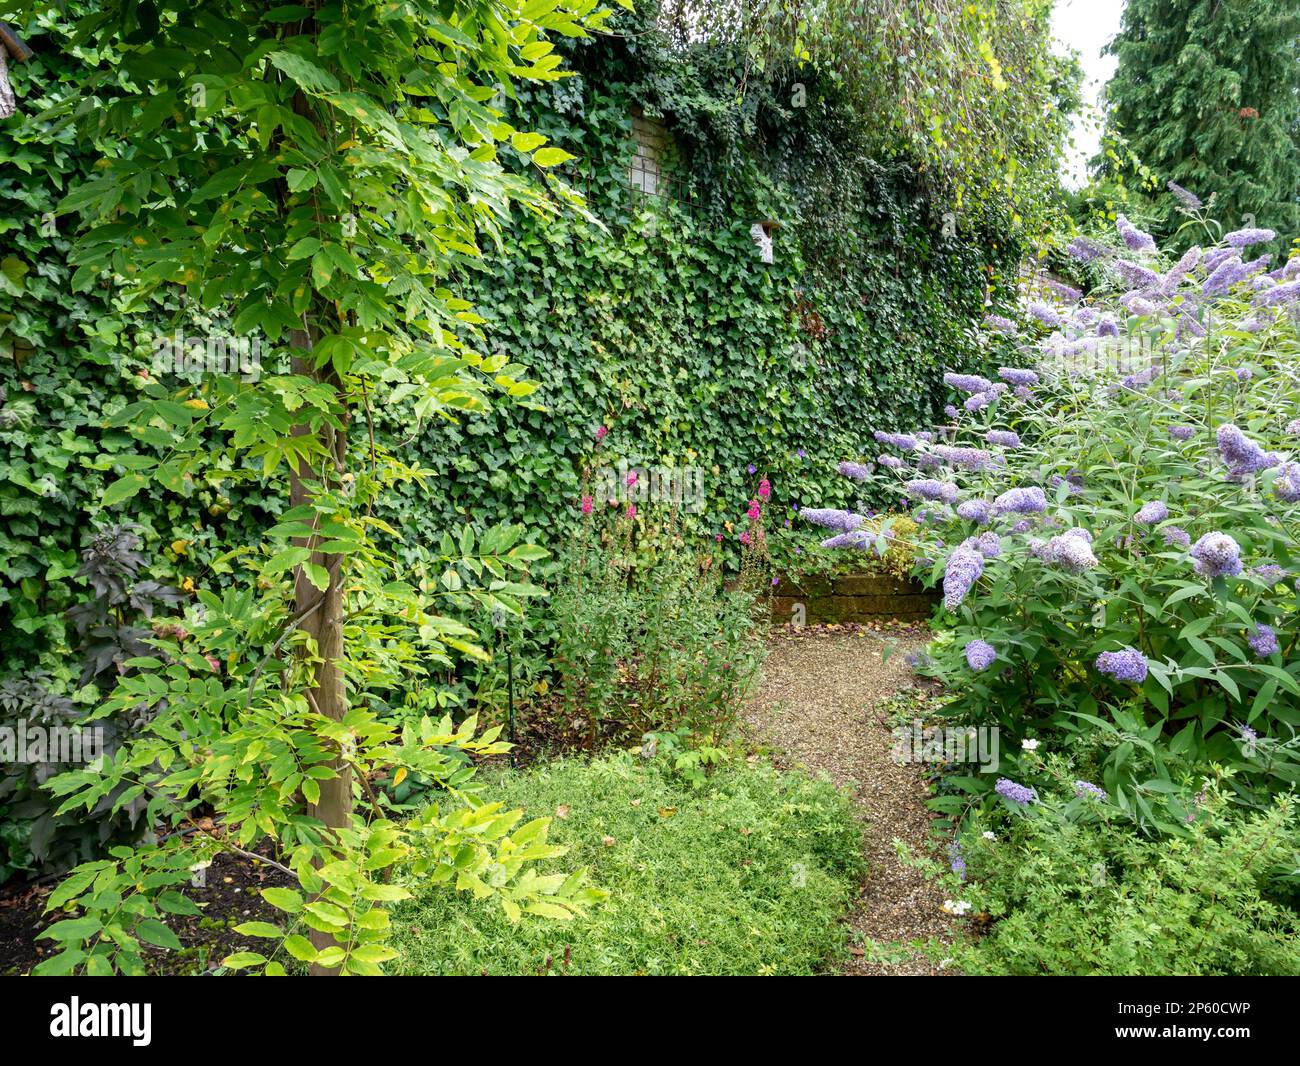 Small garden with densely planted native plants like ivy, wisteria and gravel path in summer, Netherlands Stock Photo